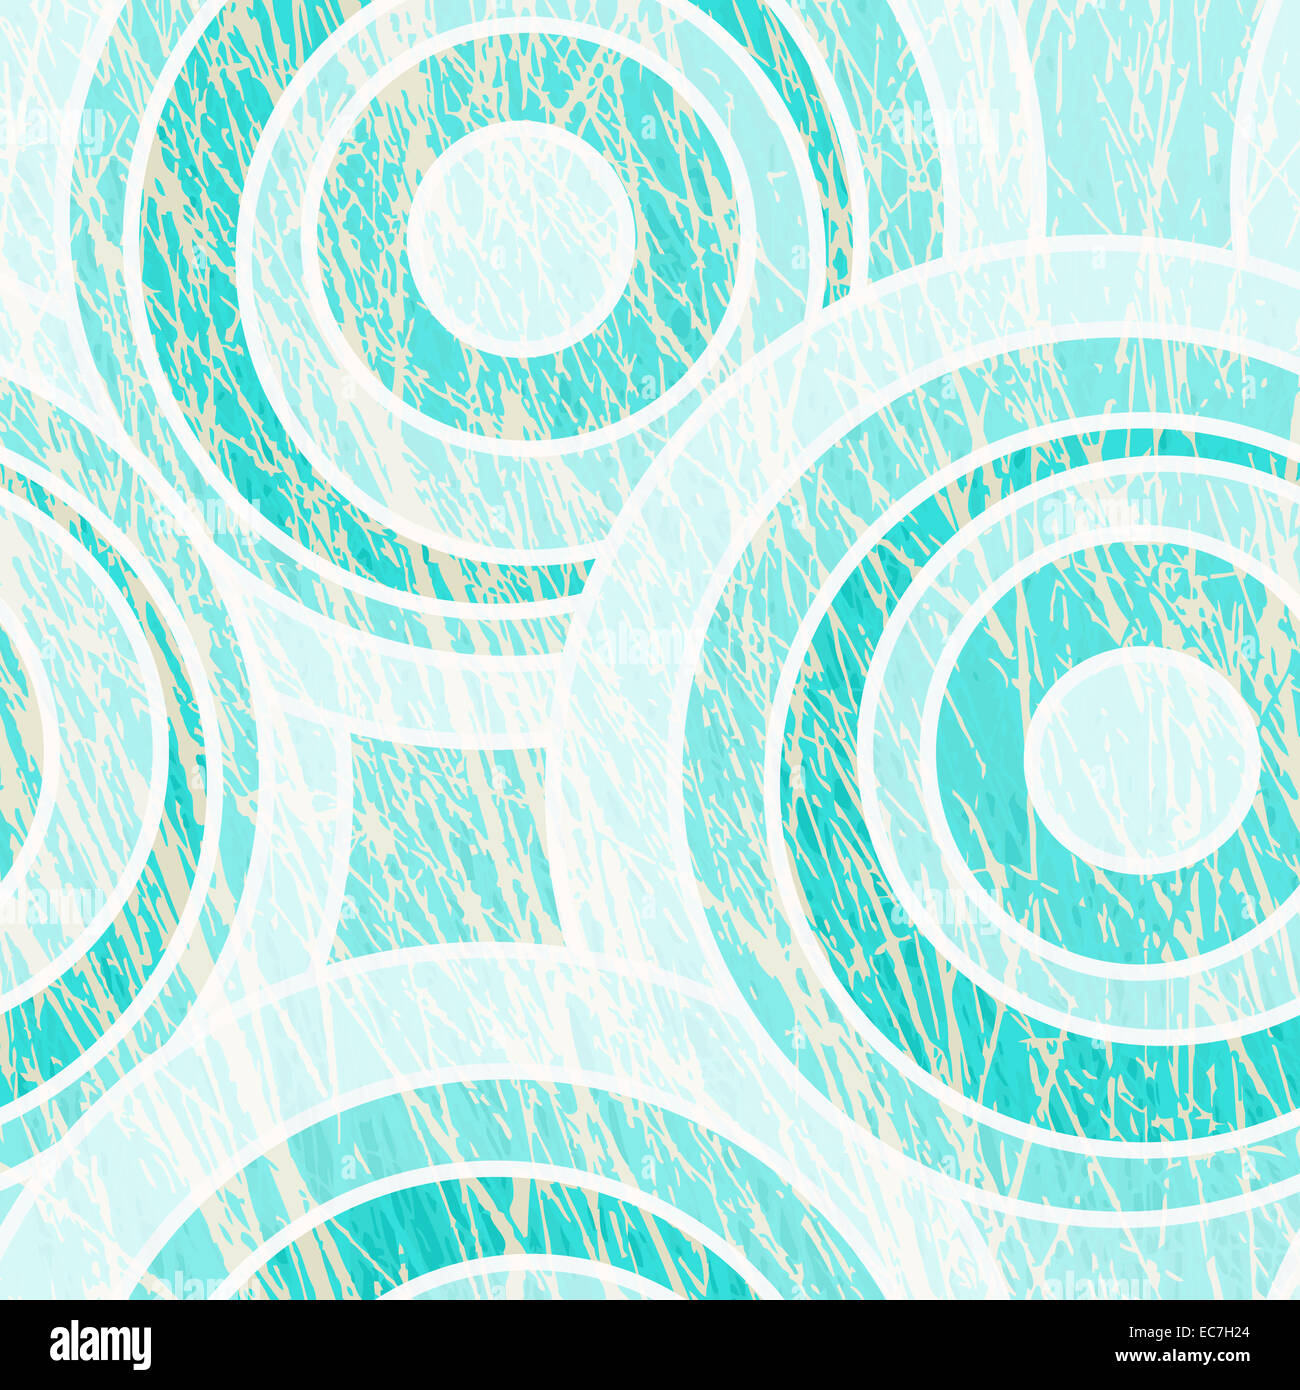 abstract grunge background with blue circles. vector vintage texture Stock Photo